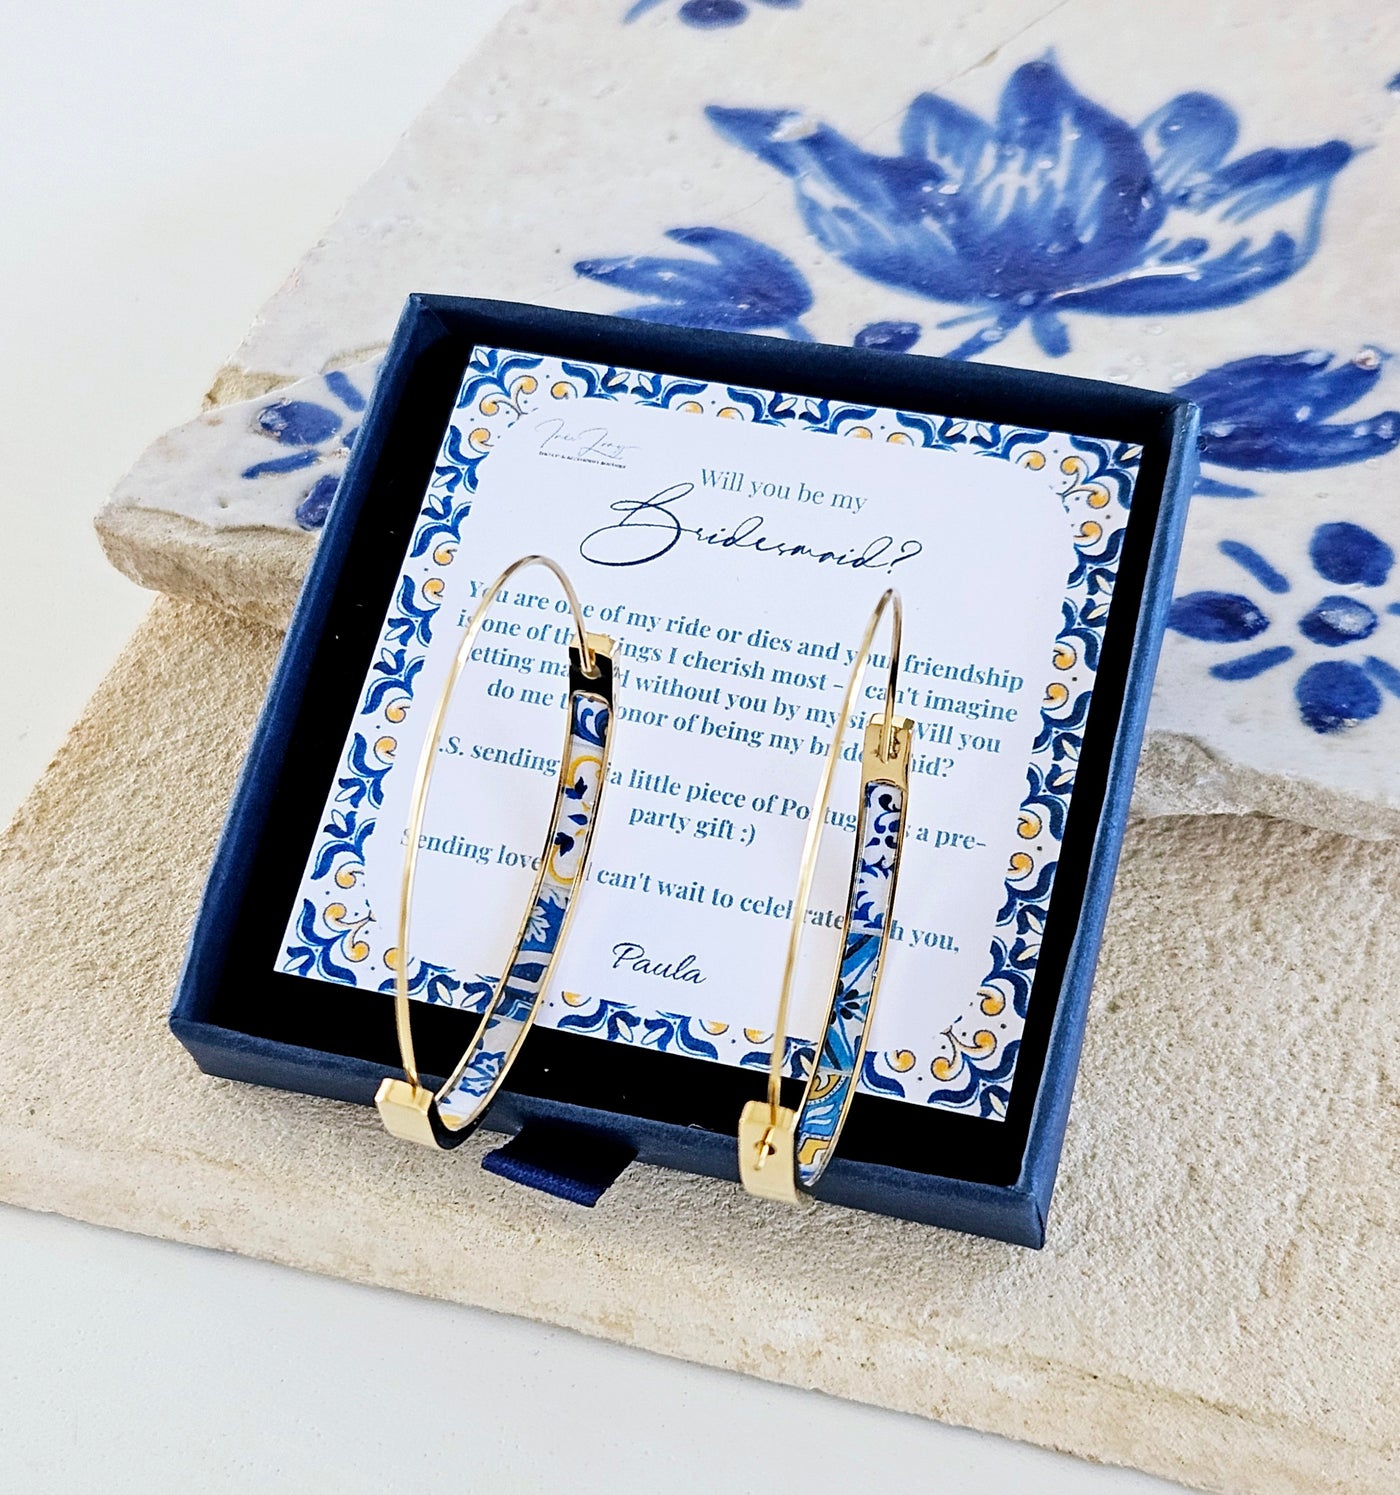 Bridesmaid Proposal Gold Hoop Earring Personalized Message Card Will You Be My Bridesmaid Gift Wedding Bridesmaid Custom Memento Jewelry